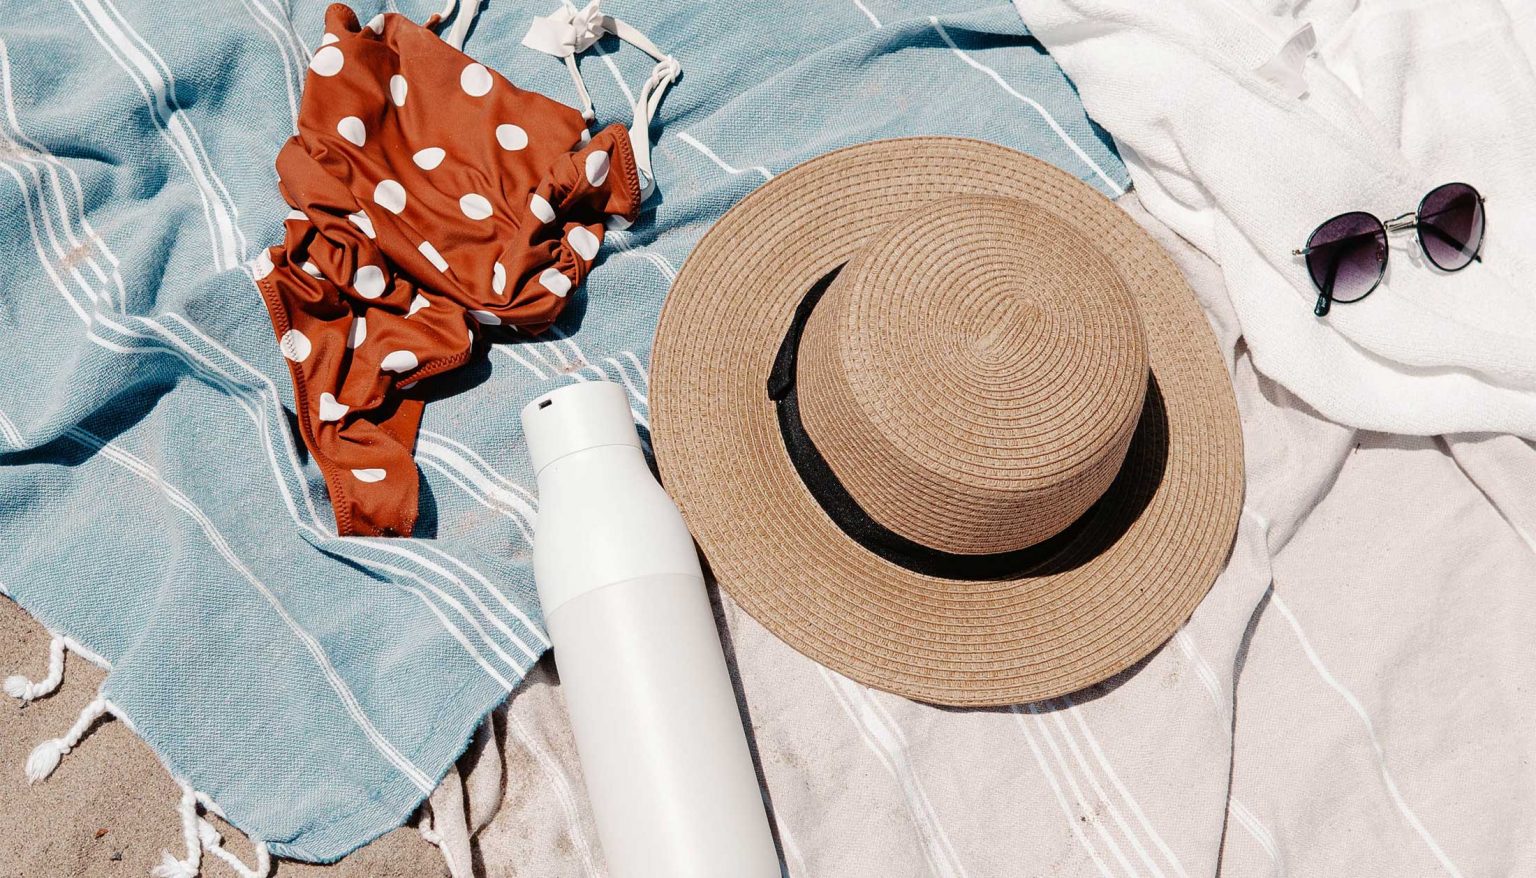 Ten Tips for Staying Safe in the Summer Sun